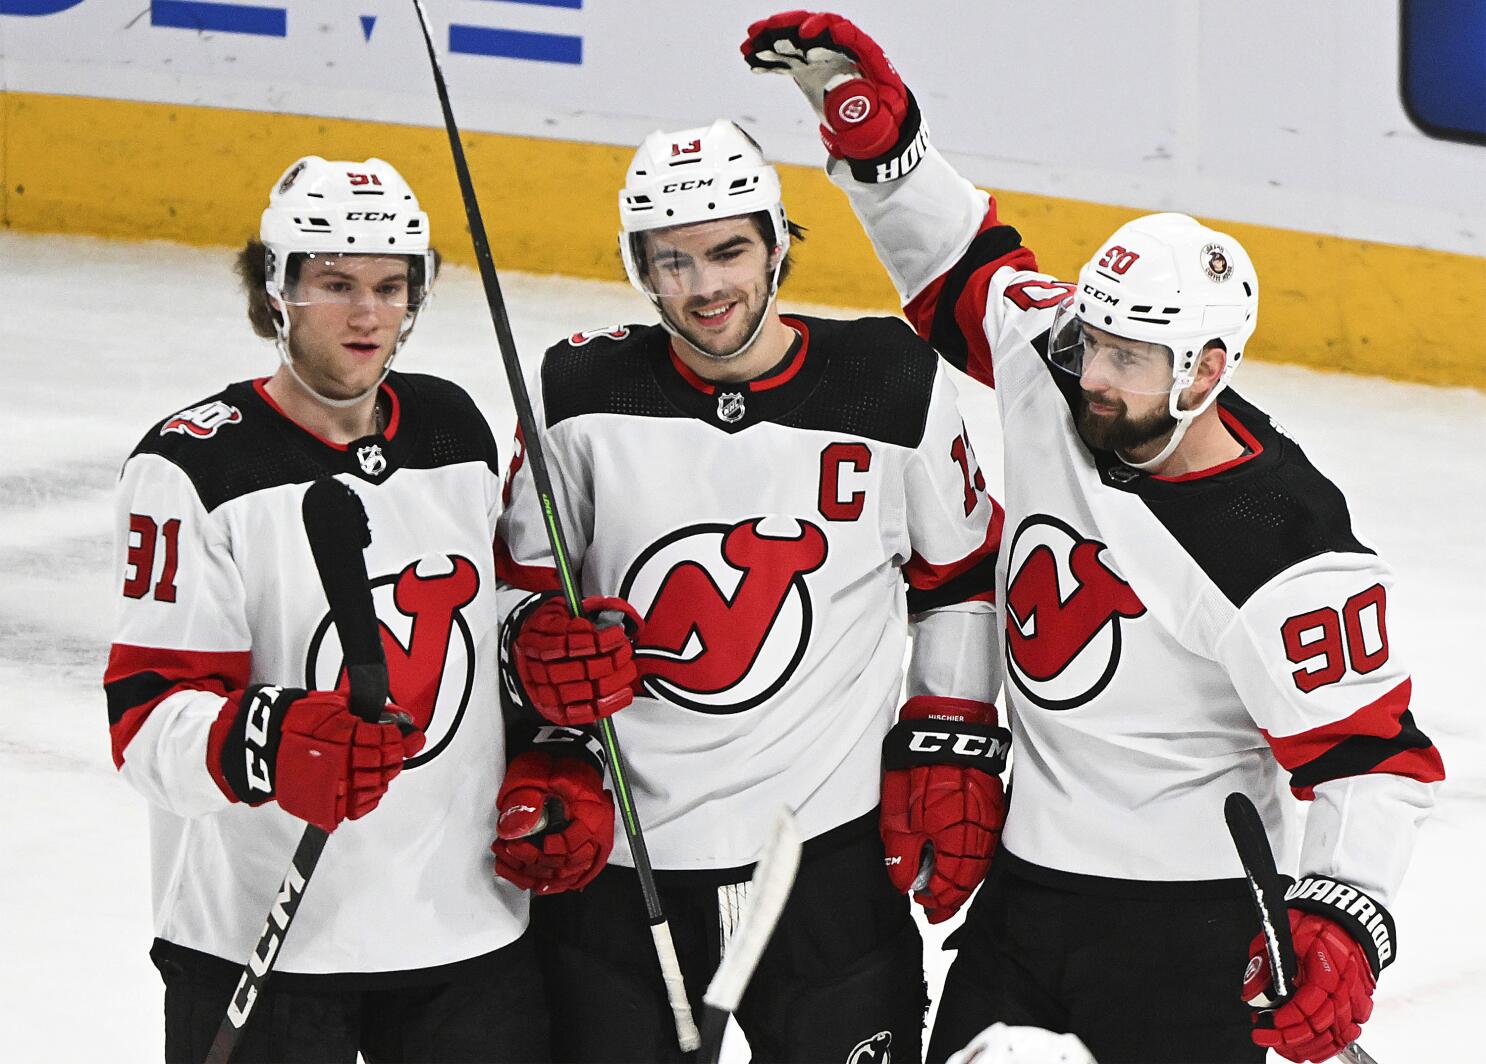 New Jersey Devils vs. Montreal Canadiens 3/11/23 - NHL Live Stream